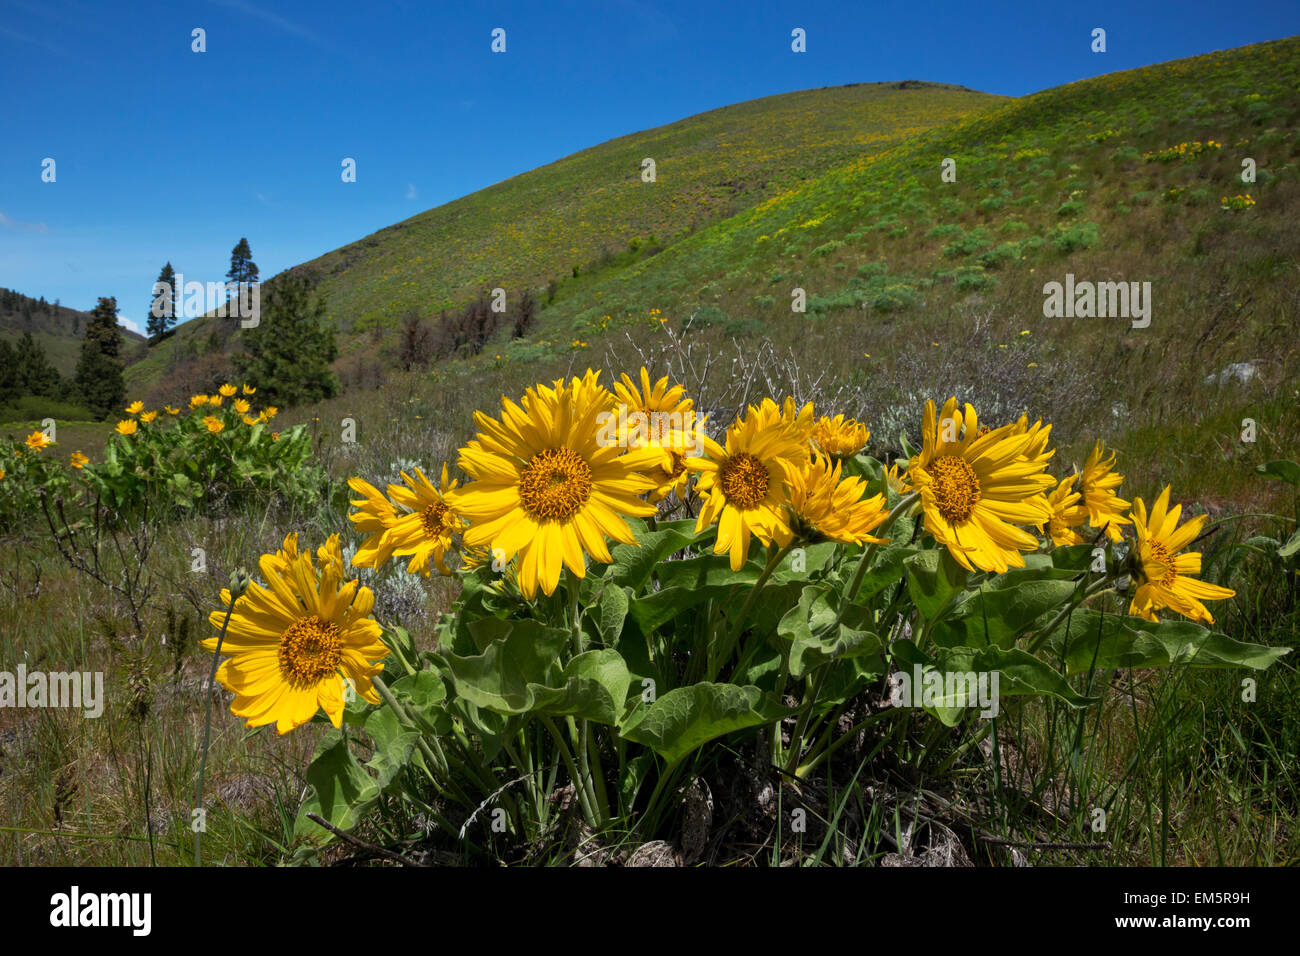 WA10324-00...WASHINGTON - Balsamroot blooming on a hillside in Swale Canyon above the Klickitat Trail, a rails to trails route. Stock Photo